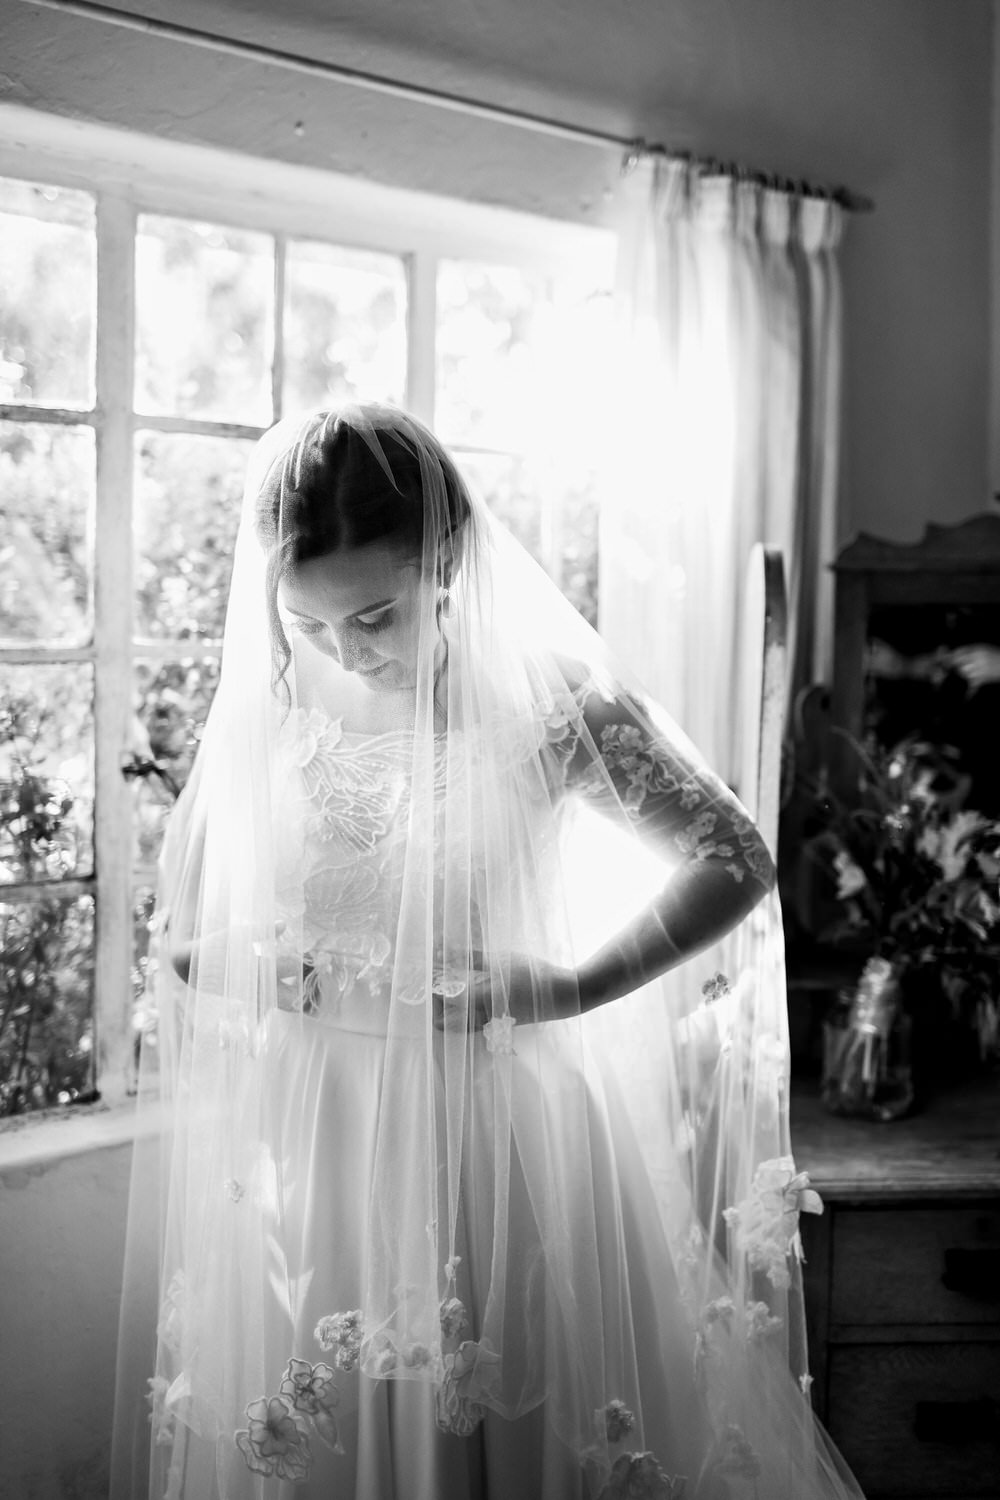 A beautiful black and white image of a bride in a veil, standing in front of a cottage window, as she makes final adjustments to her gown before her Elgin wedding